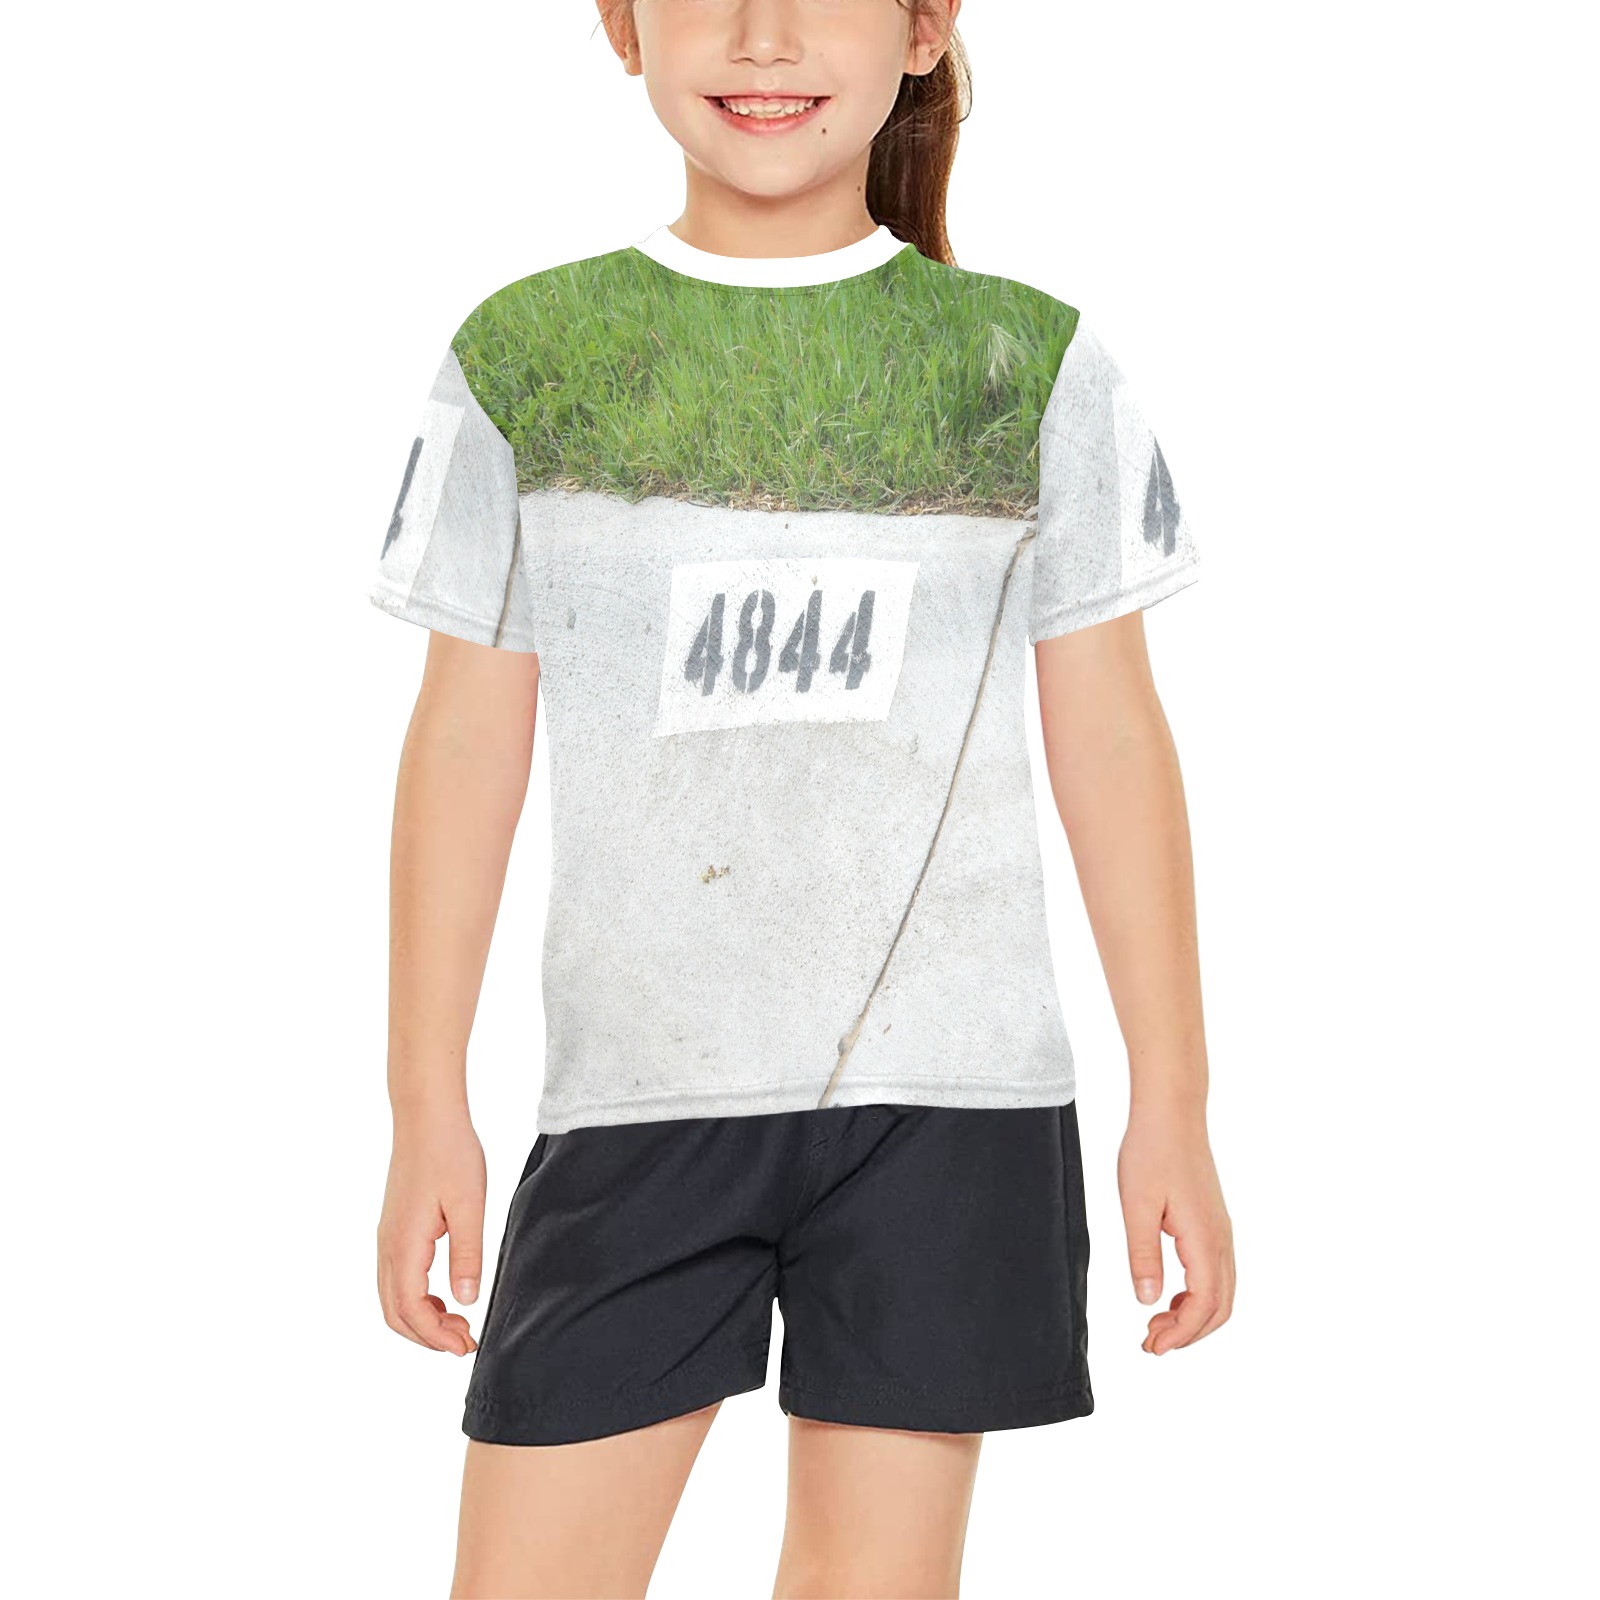 Street Number 4844 with white collar Big Girls' All Over Print Crew Neck T-Shirt (Model T40-2)